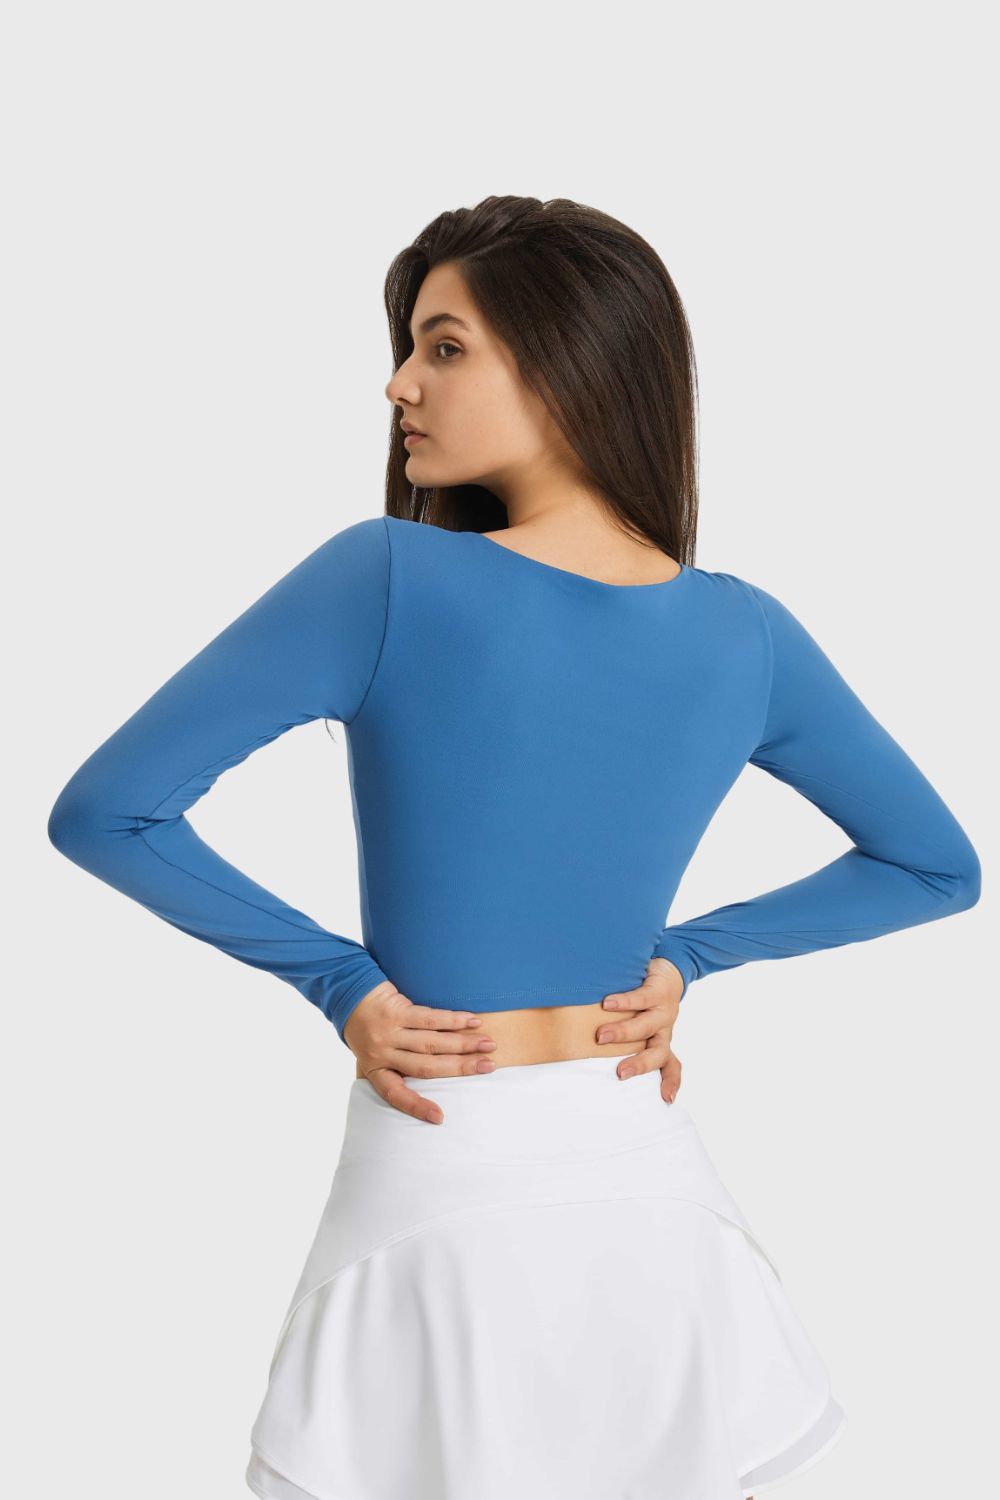 Cutout Long Sleeve Cropped Sports Top Print on any thing USA/STOD clothes